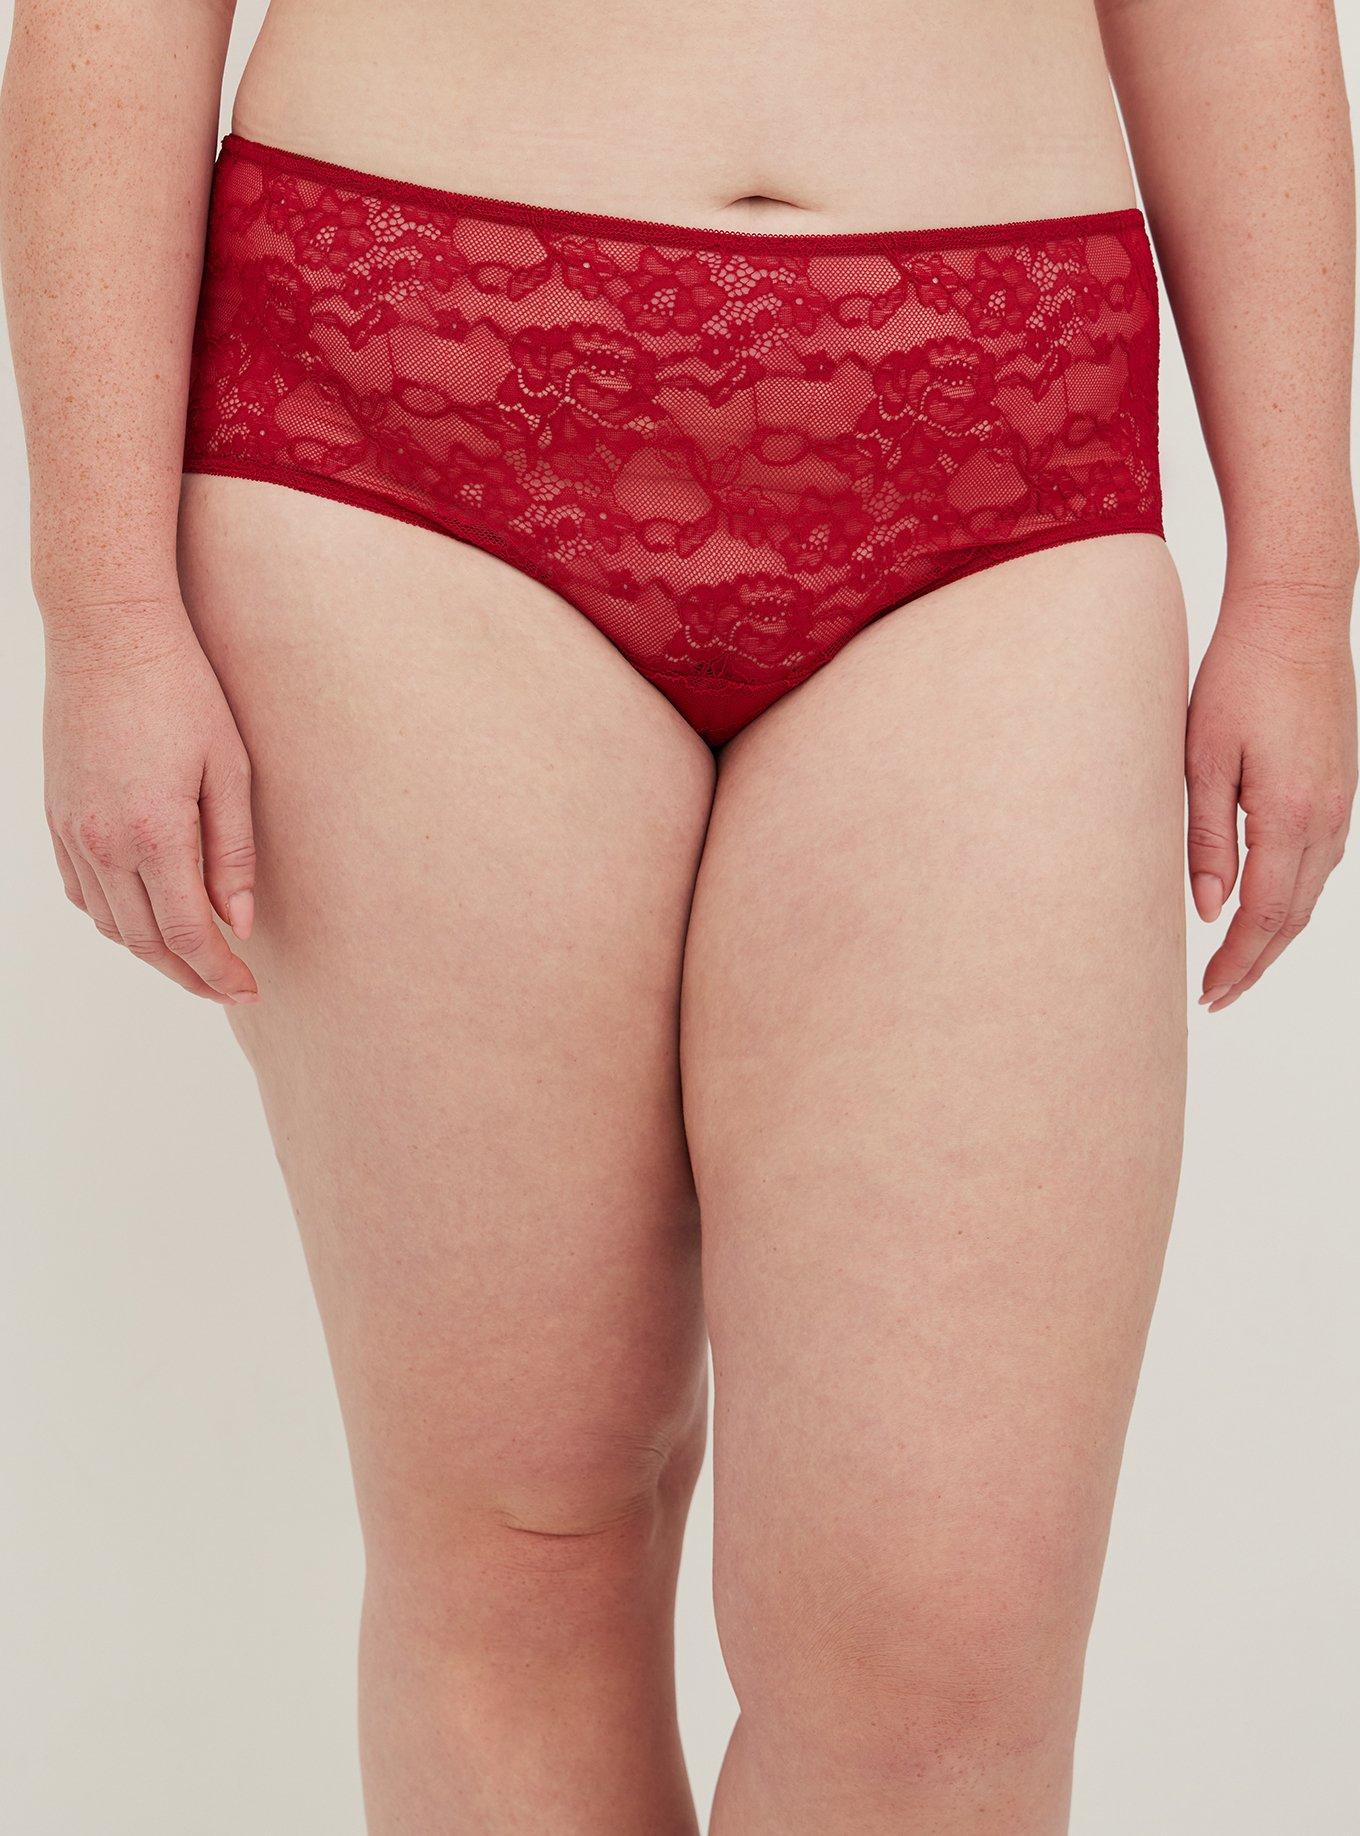 Plus Size - Open Back Cheeky Panty - Satin & Lace Bow Red - Torrid